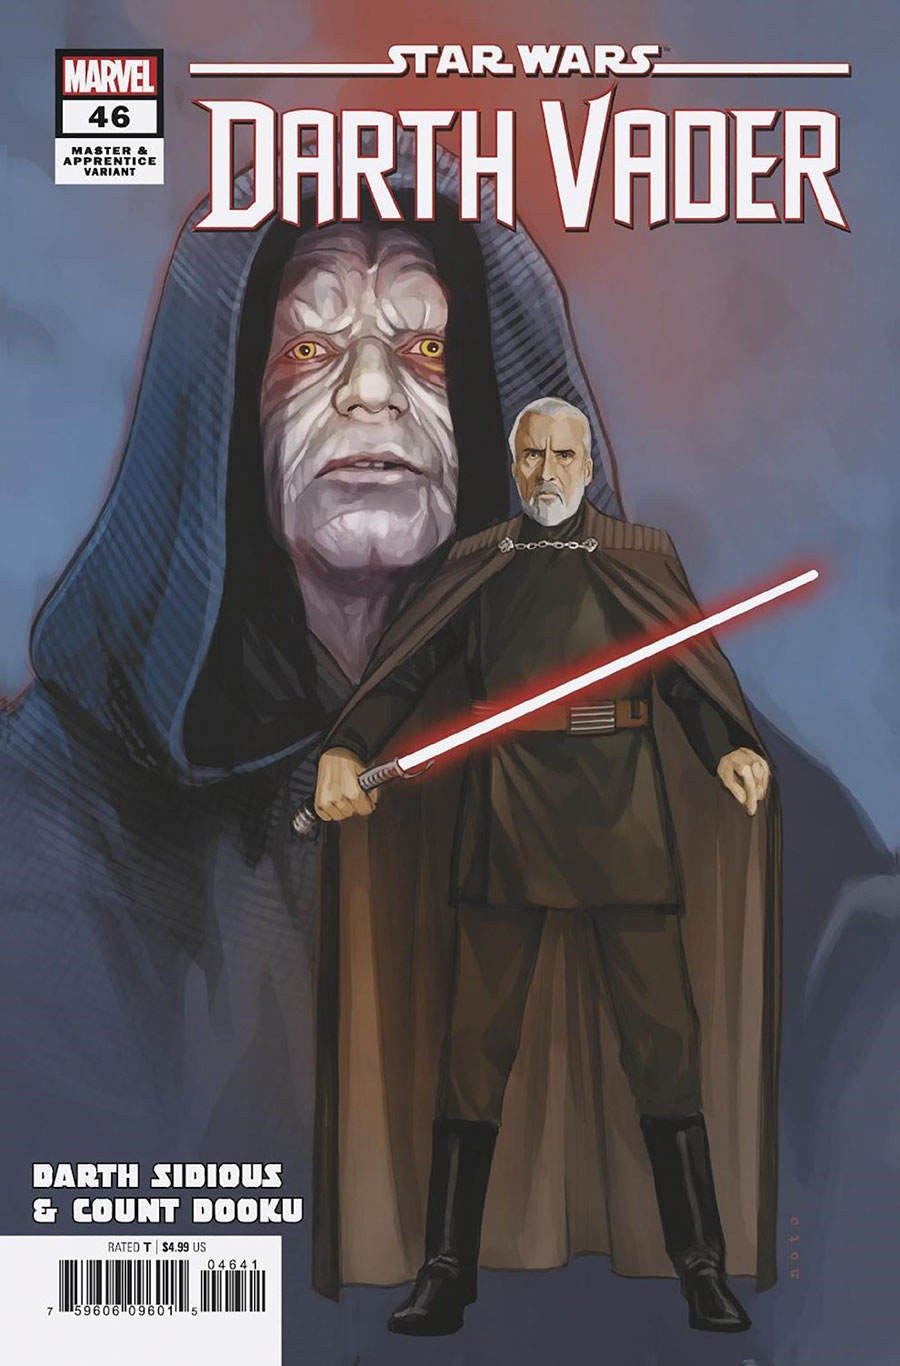 Star Wars Darth Vader #46 Cover C Variant Phil Noto Master & Apprentice Darth Sidious & Count Dooku Cover